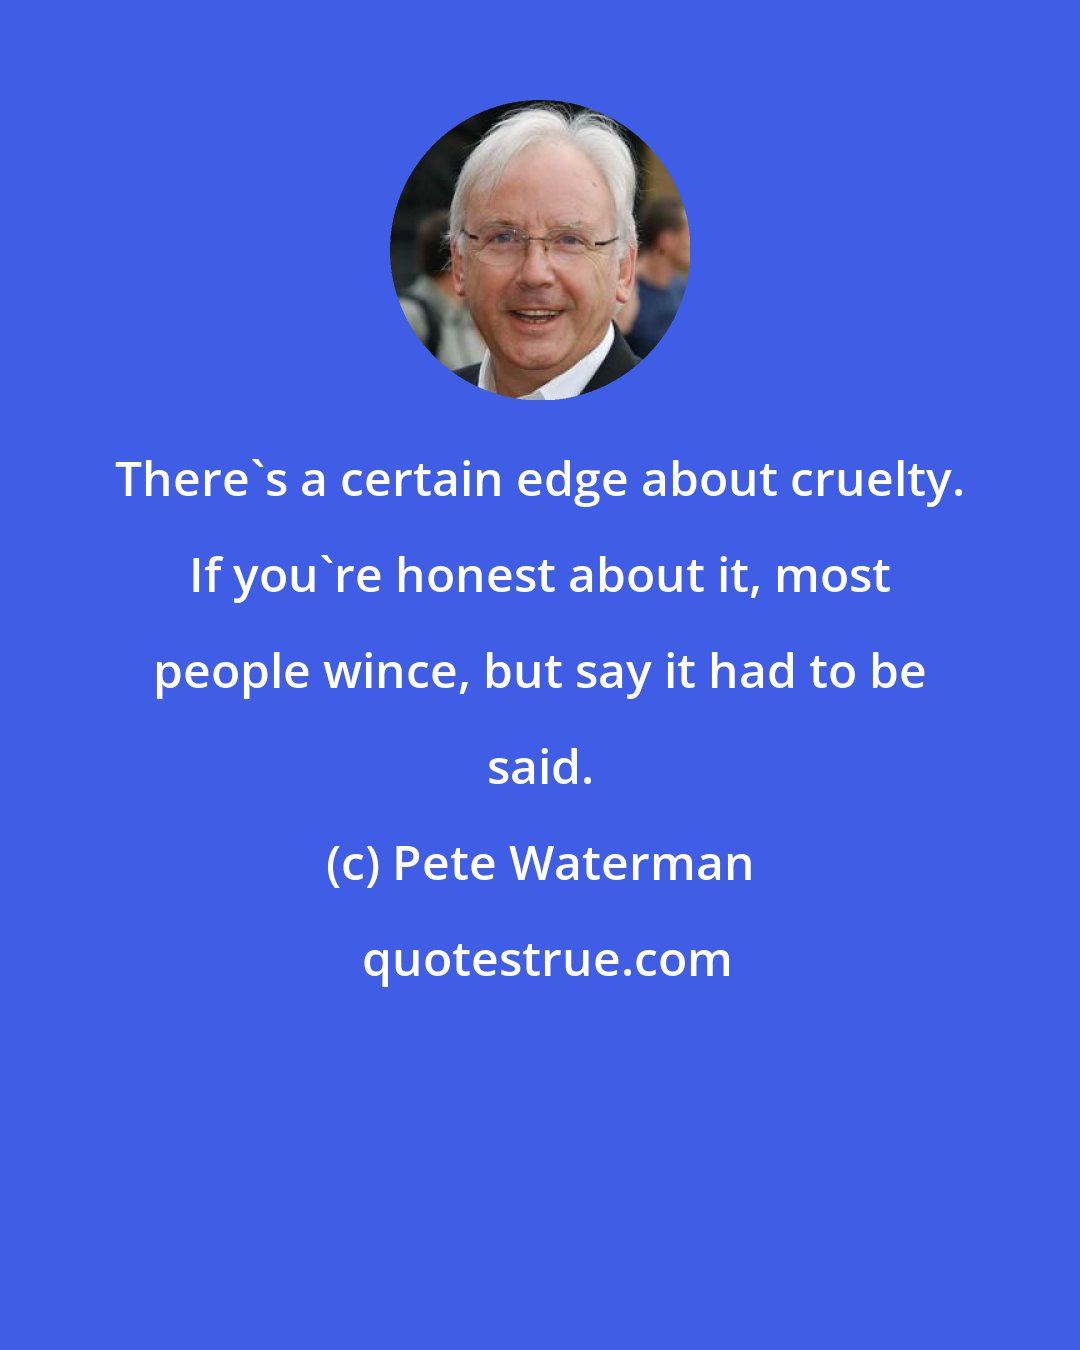 Pete Waterman: There's a certain edge about cruelty. If you're honest about it, most people wince, but say it had to be said.